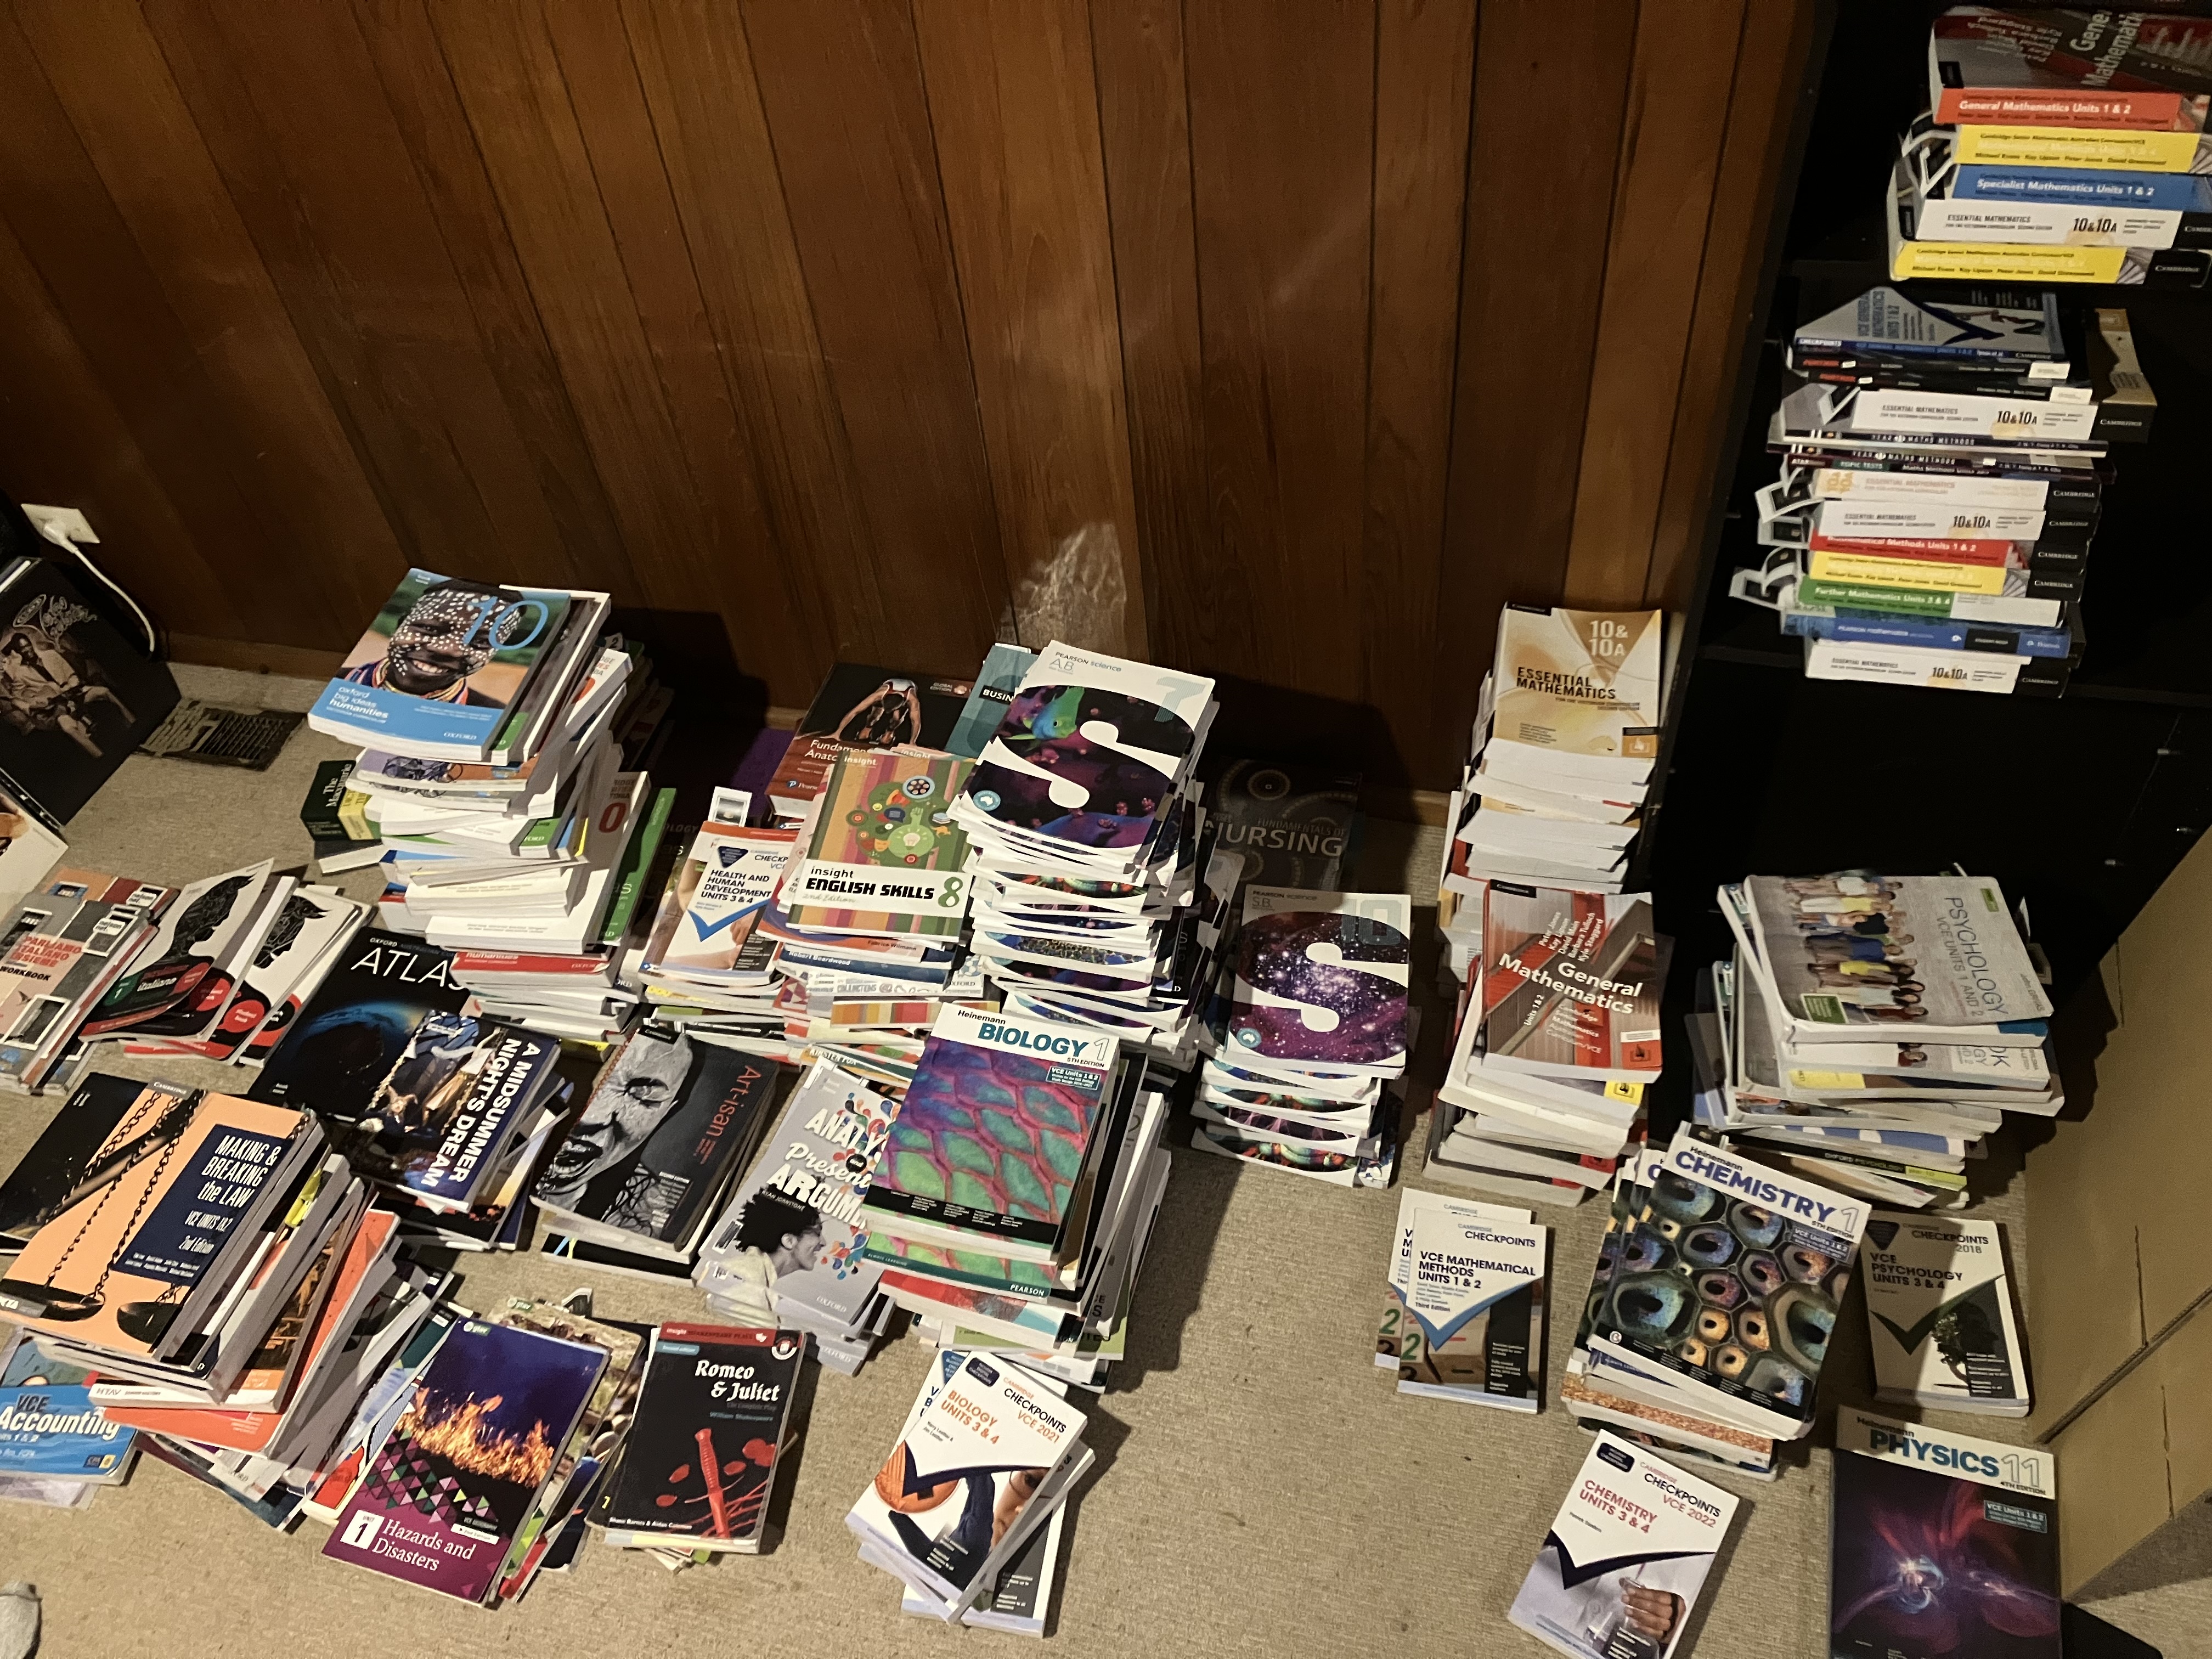 A pile of just some of the over 300 textbooks collected by Young Assets Foundation and Yarra Libraries as part of a textbook drive for the Fitzroy Youth Homework Club at Fitzroy Library